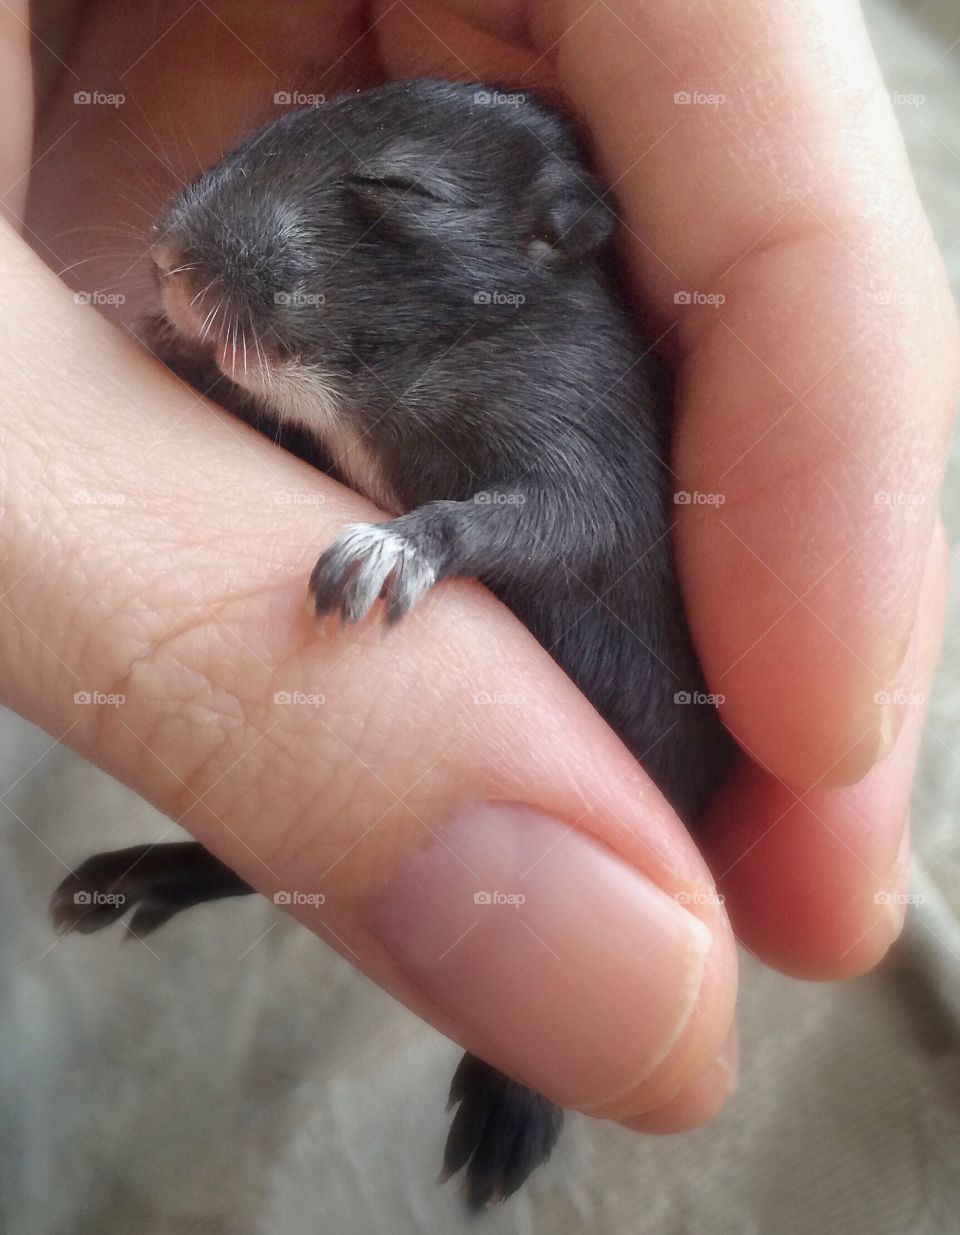 A woman's hand holding baby mouse